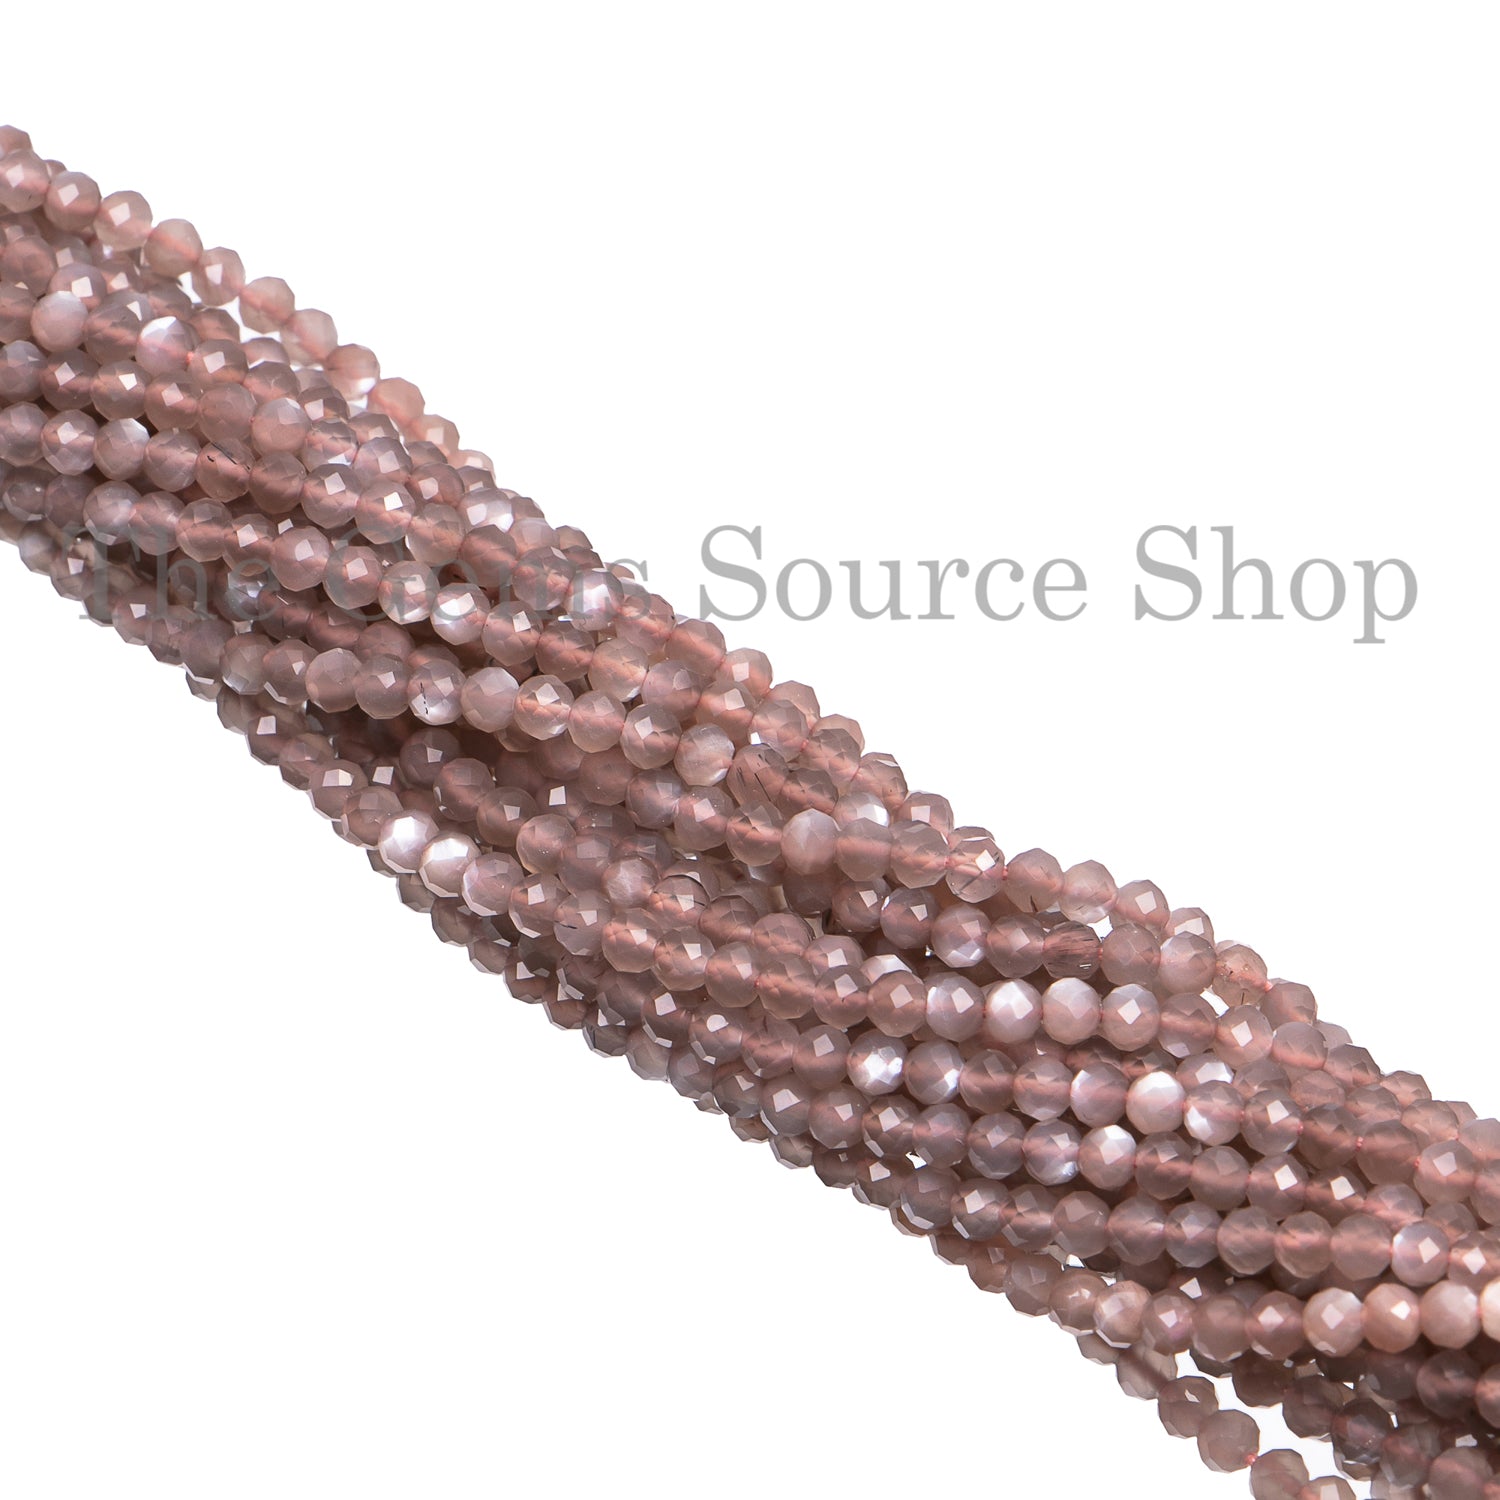 Chocolate Moonstone Beads, Moonstone Faceted Beads, Moonstone Rondelle Shape Beads